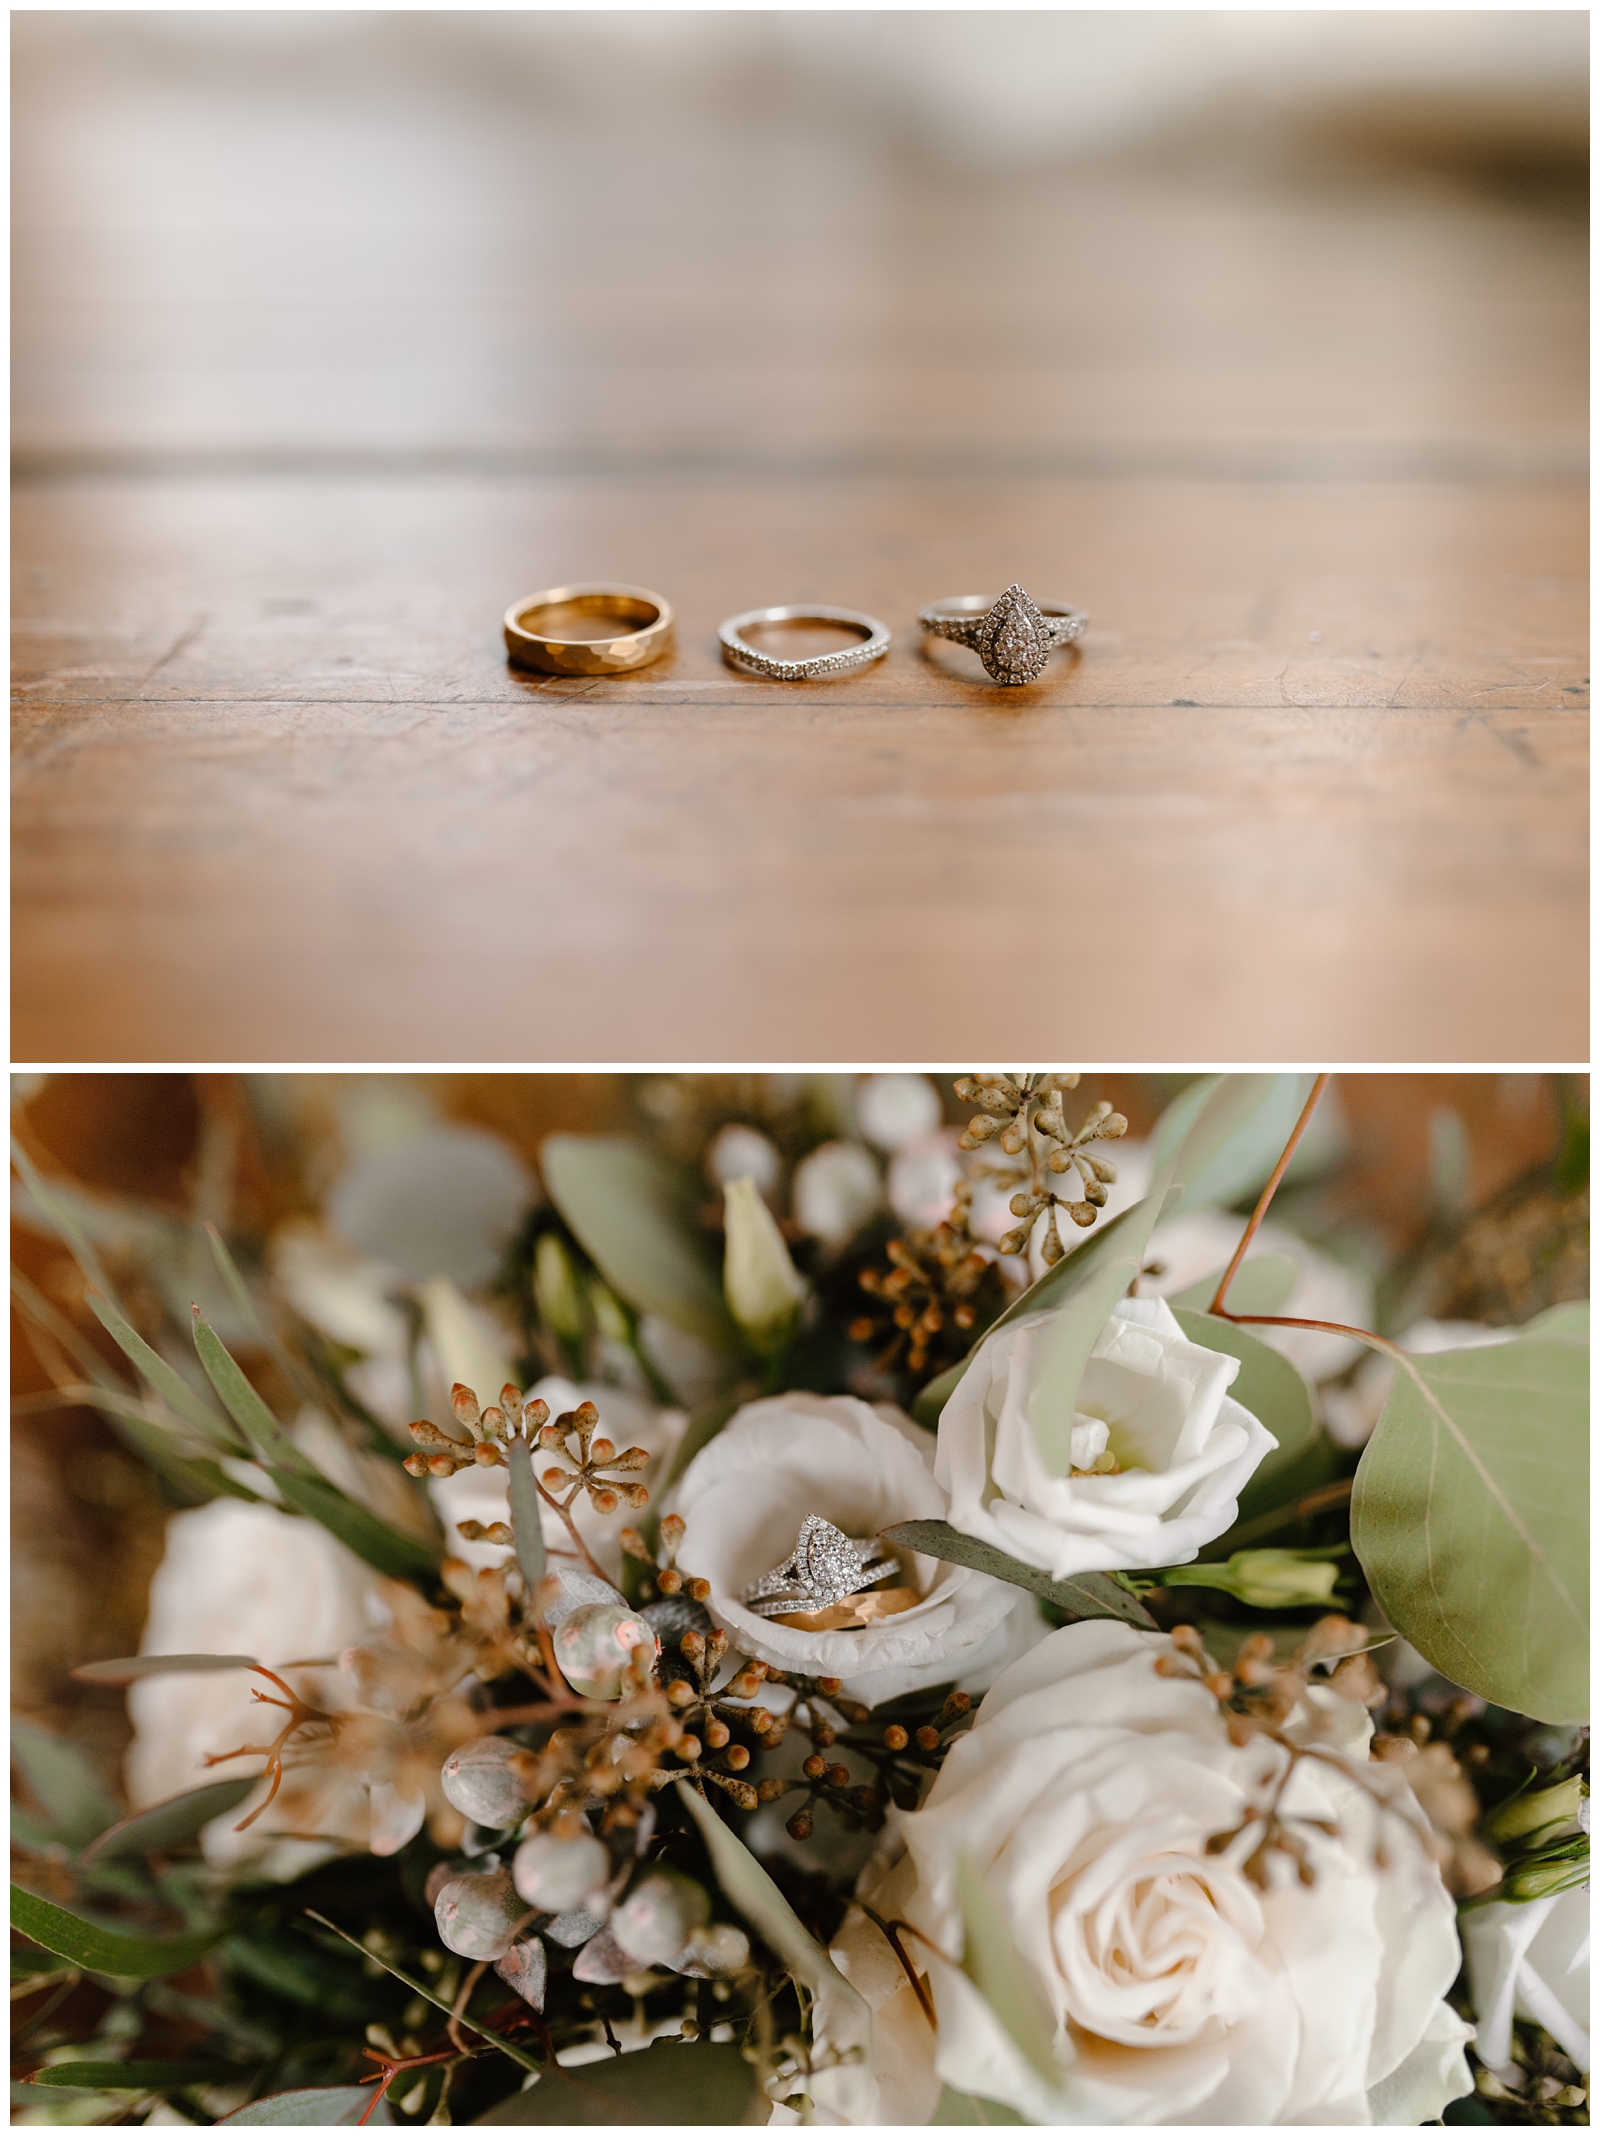 Ring detail shots of emerald and gold wedding in Greensboro NC